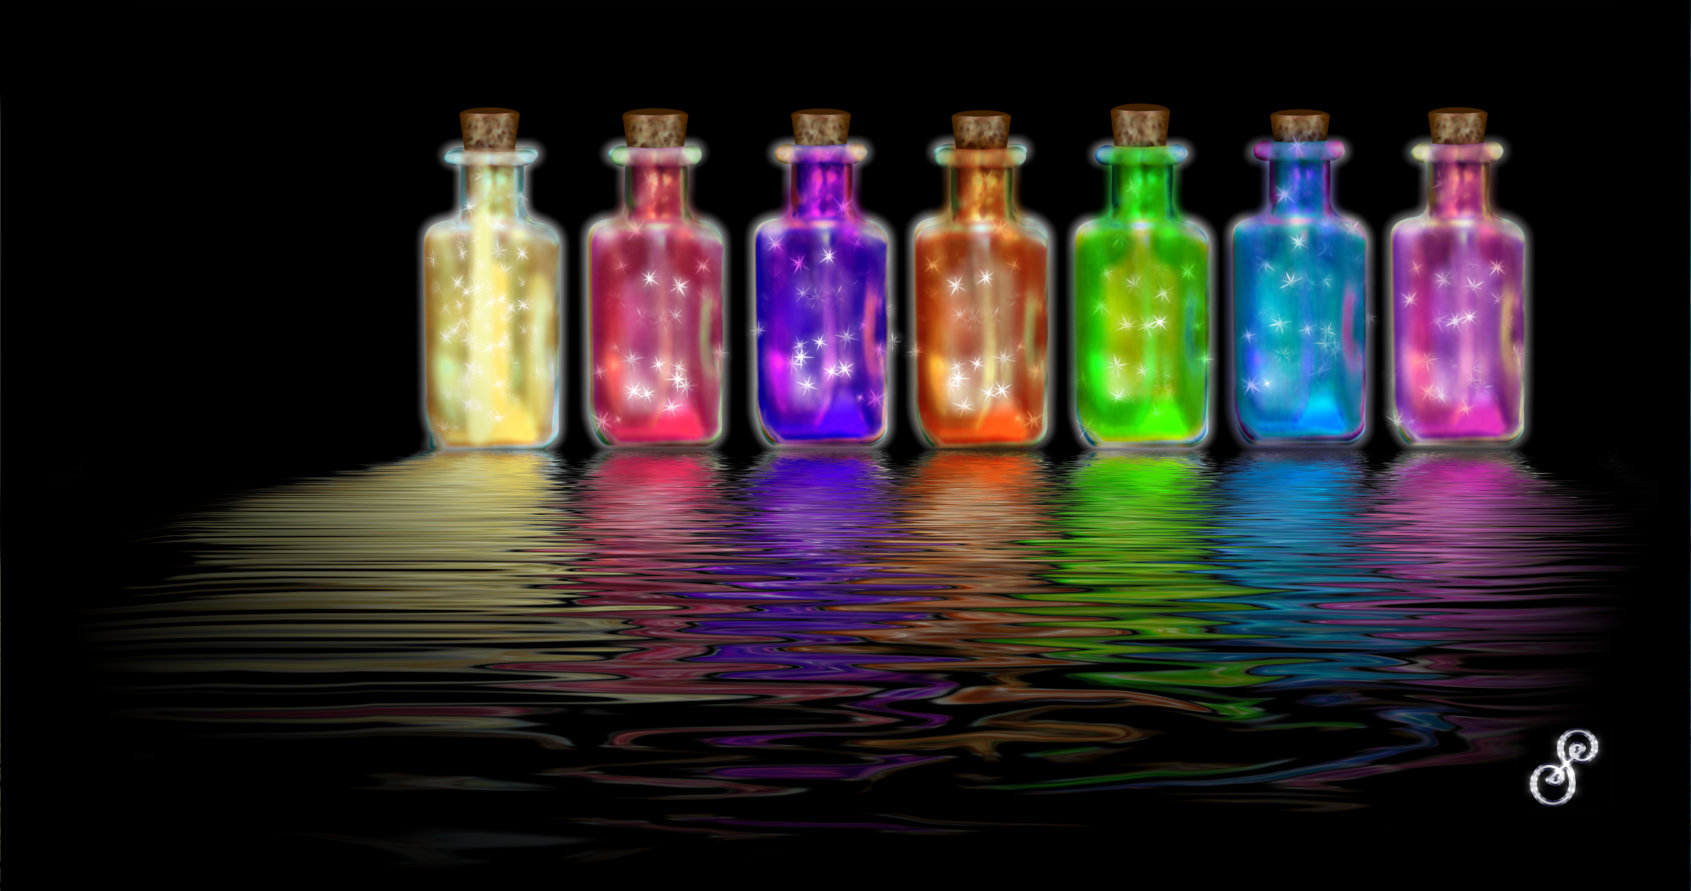 7 bottles each containing a different coloured sparkling magical energy form